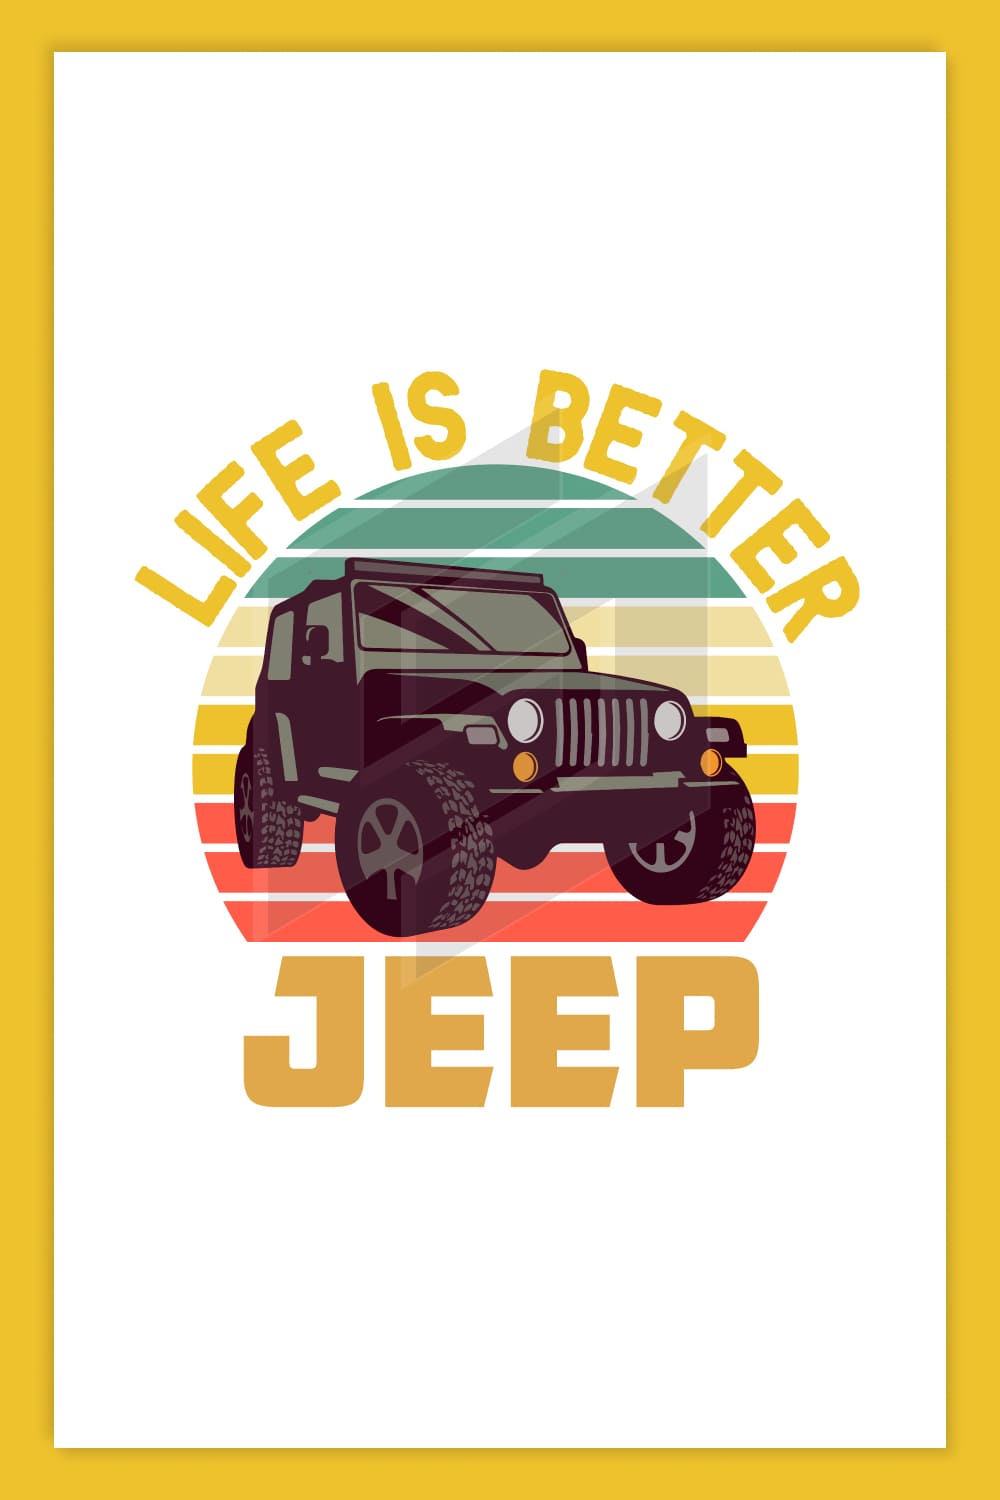 Bright, stylish and colorful Jeep image.